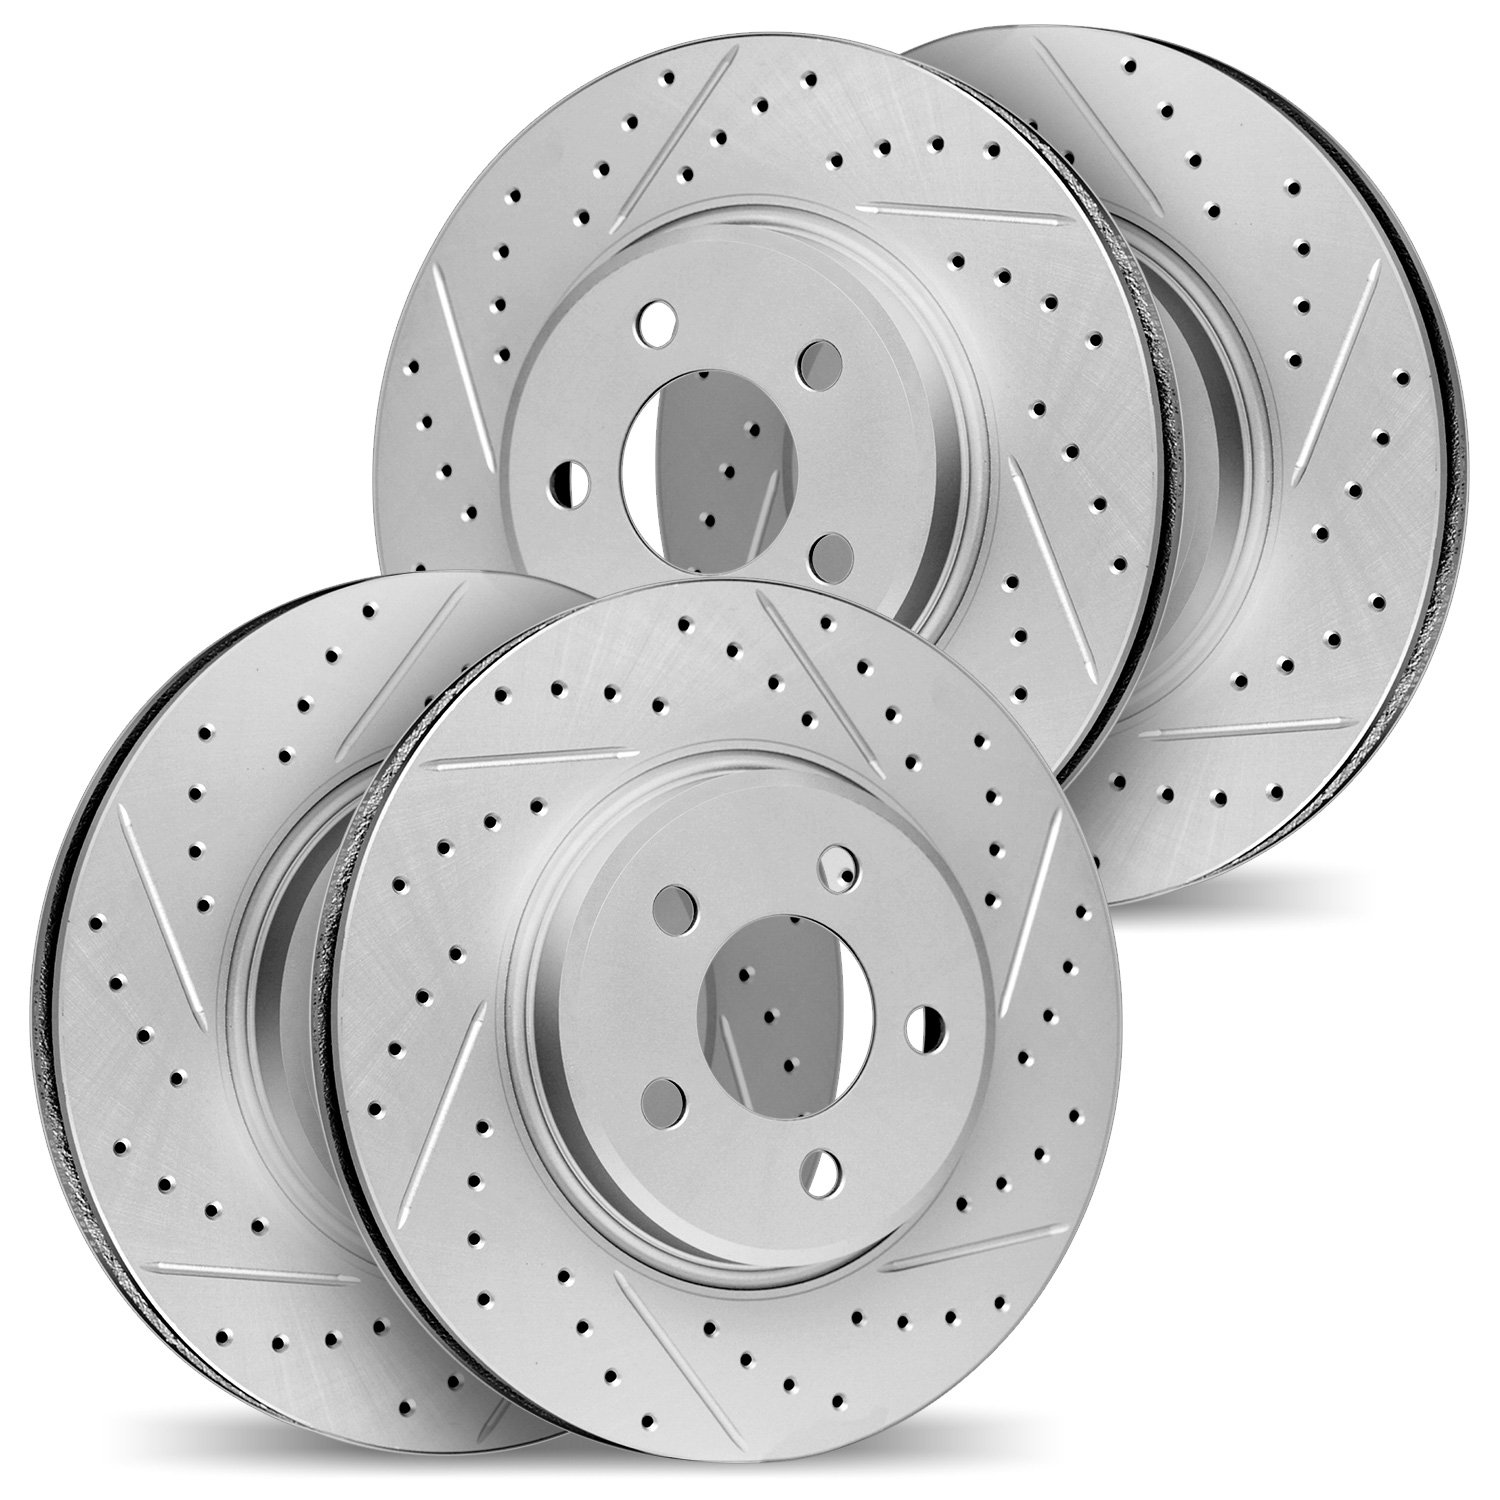 2004-54077 Geoperformance Drilled/Slotted Brake Rotors, Fits Select Ford/Lincoln/Mercury/Mazda, Position: Front and Rear